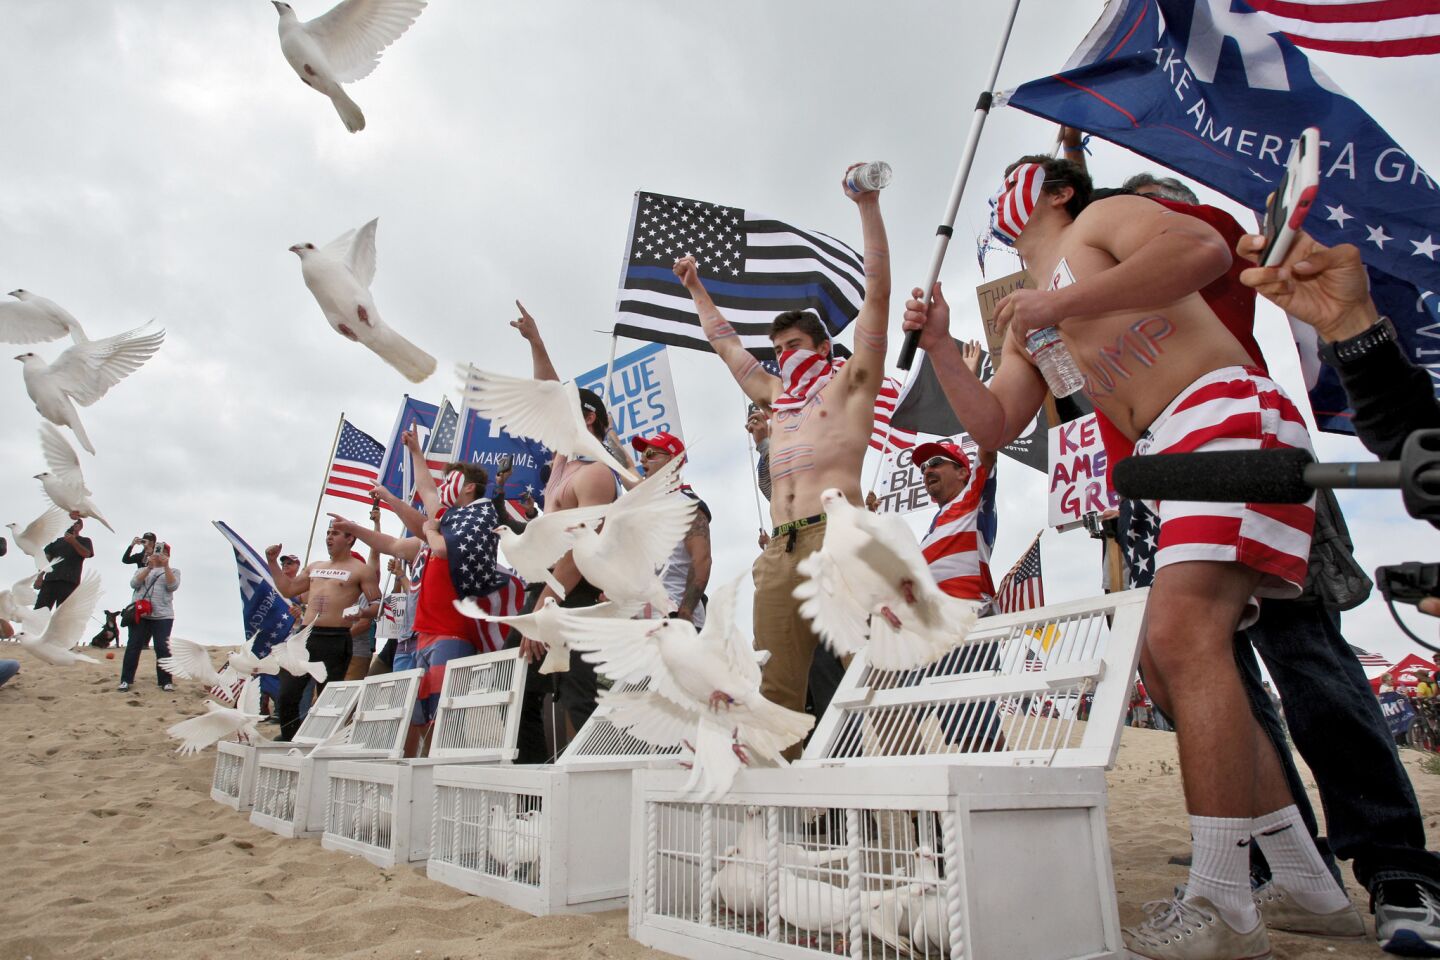 Doves are released at the start of the Make America Great Again March at Bolsa Chica State Beach in Huntington Beach on Saturday.